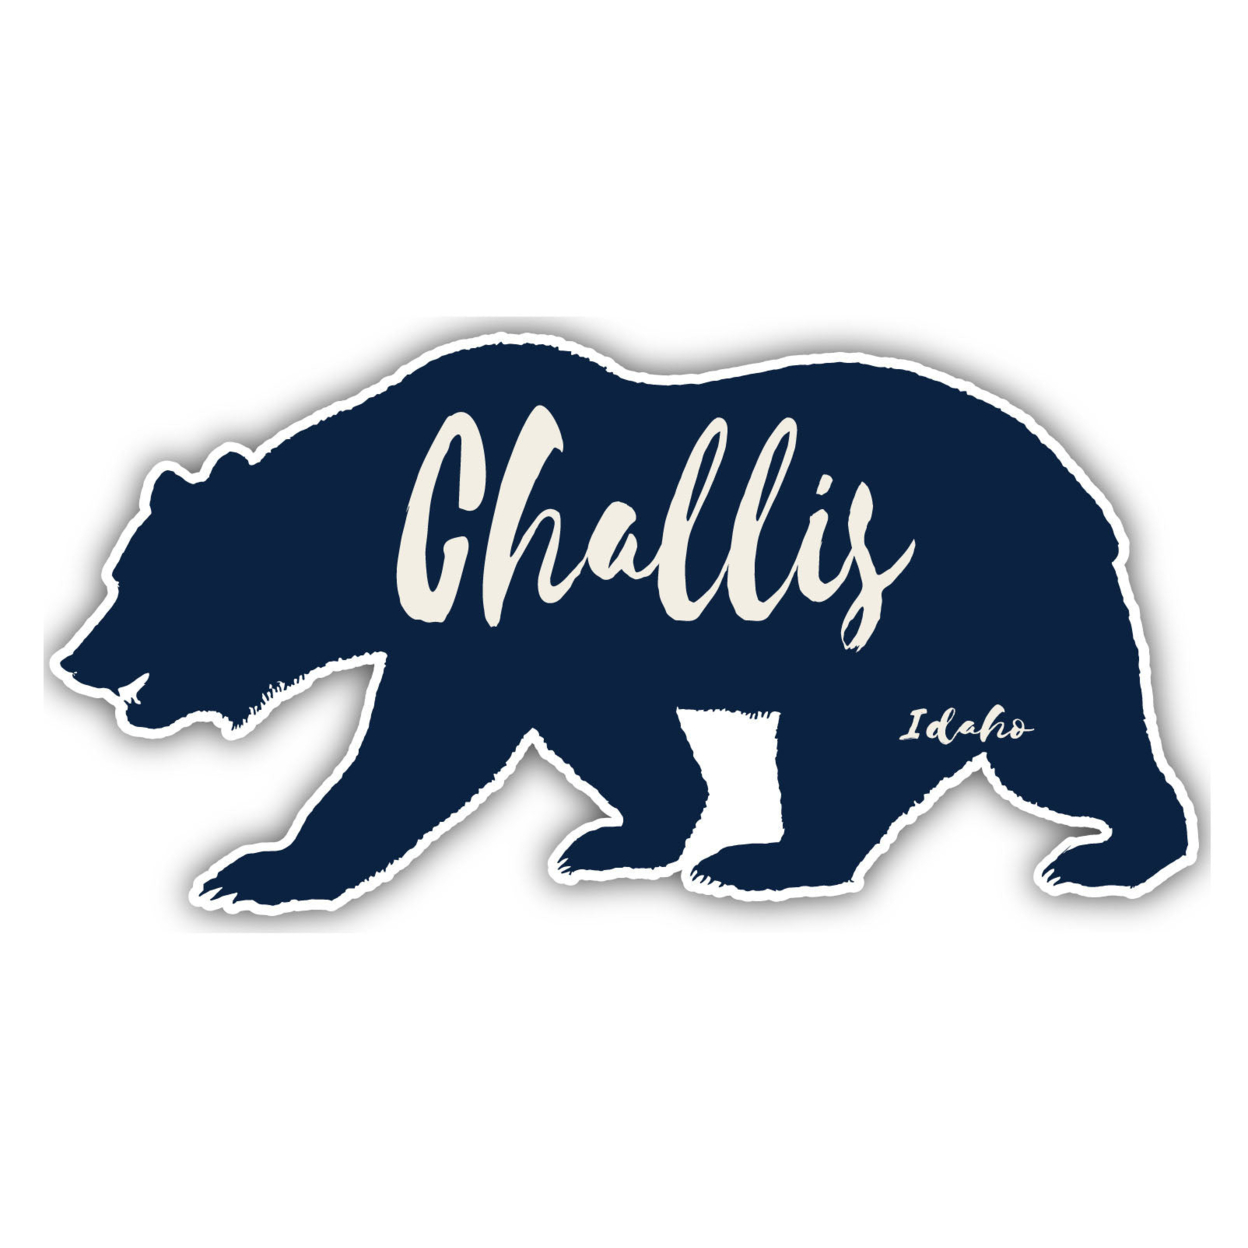 Challis Idaho Souvenir Decorative Stickers (Choose Theme And Size) - 4-Pack, 10-Inch, Tent